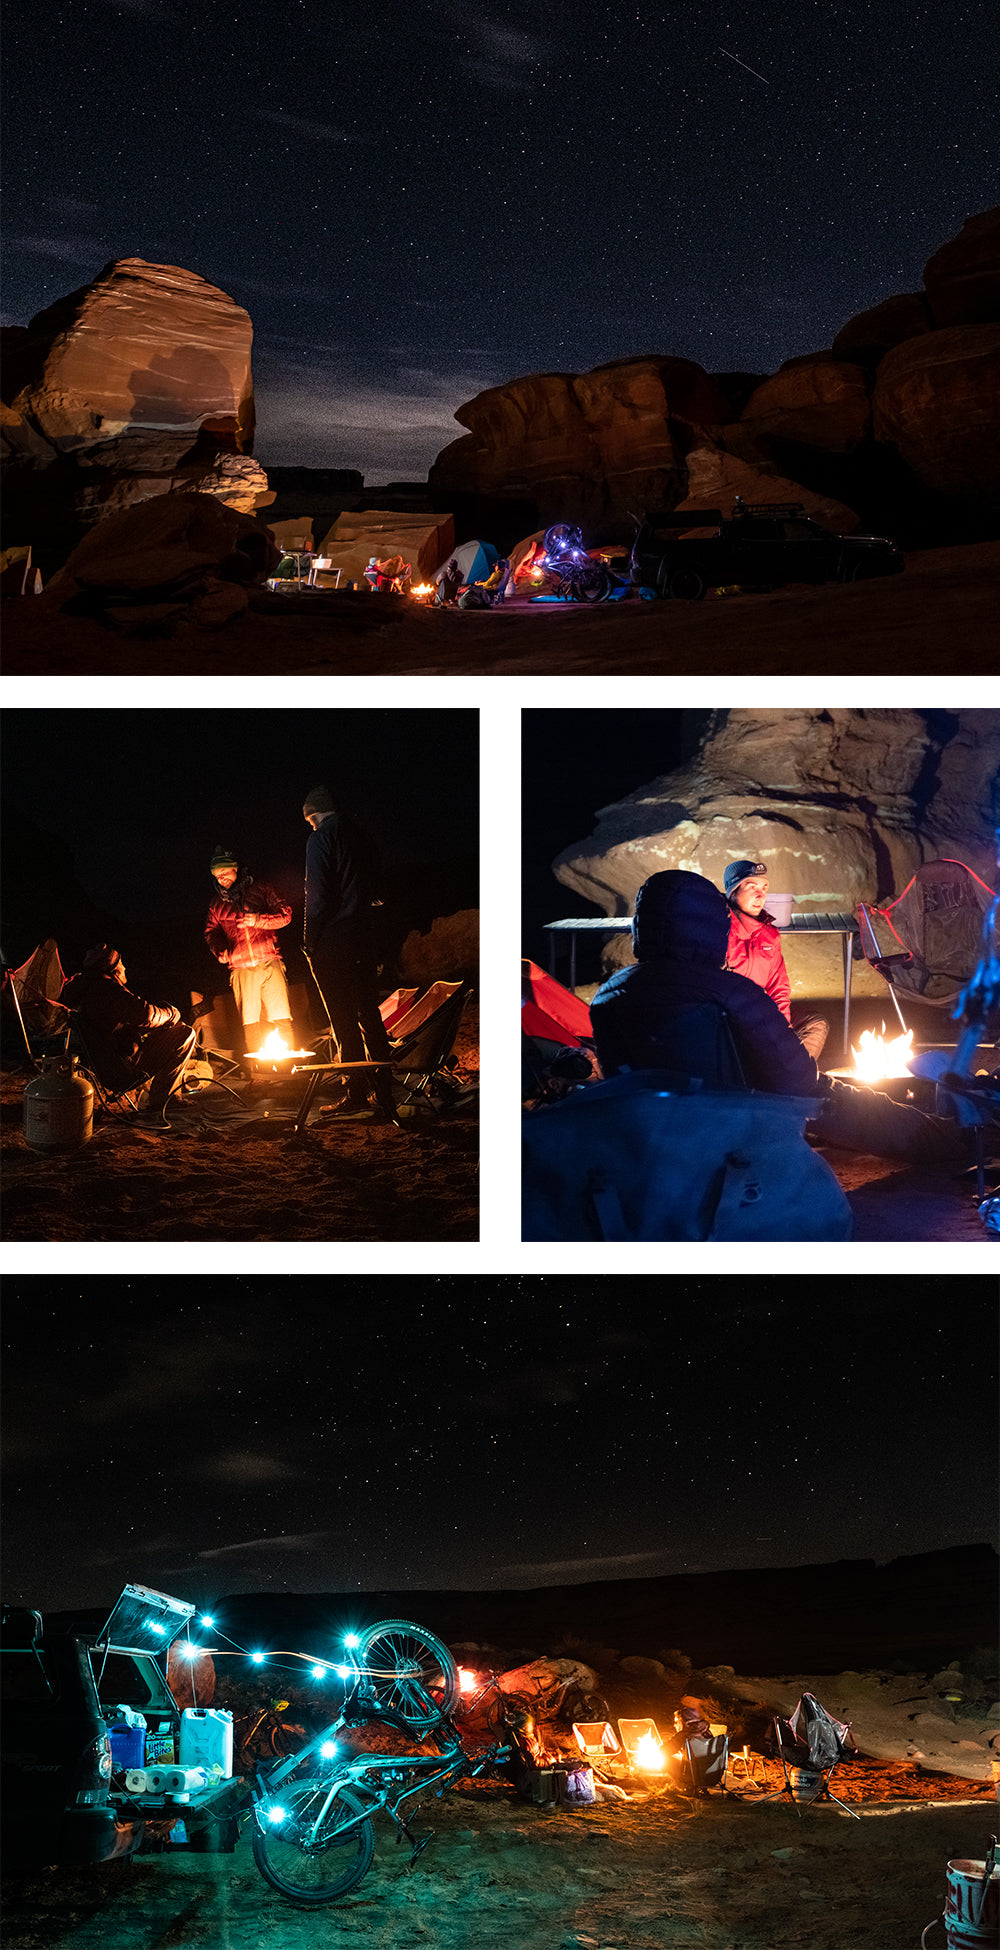 Night time shots of the Swagman Journal Crew camping under the starry night sky on Lockhart Basin Trail near Moab, Utah